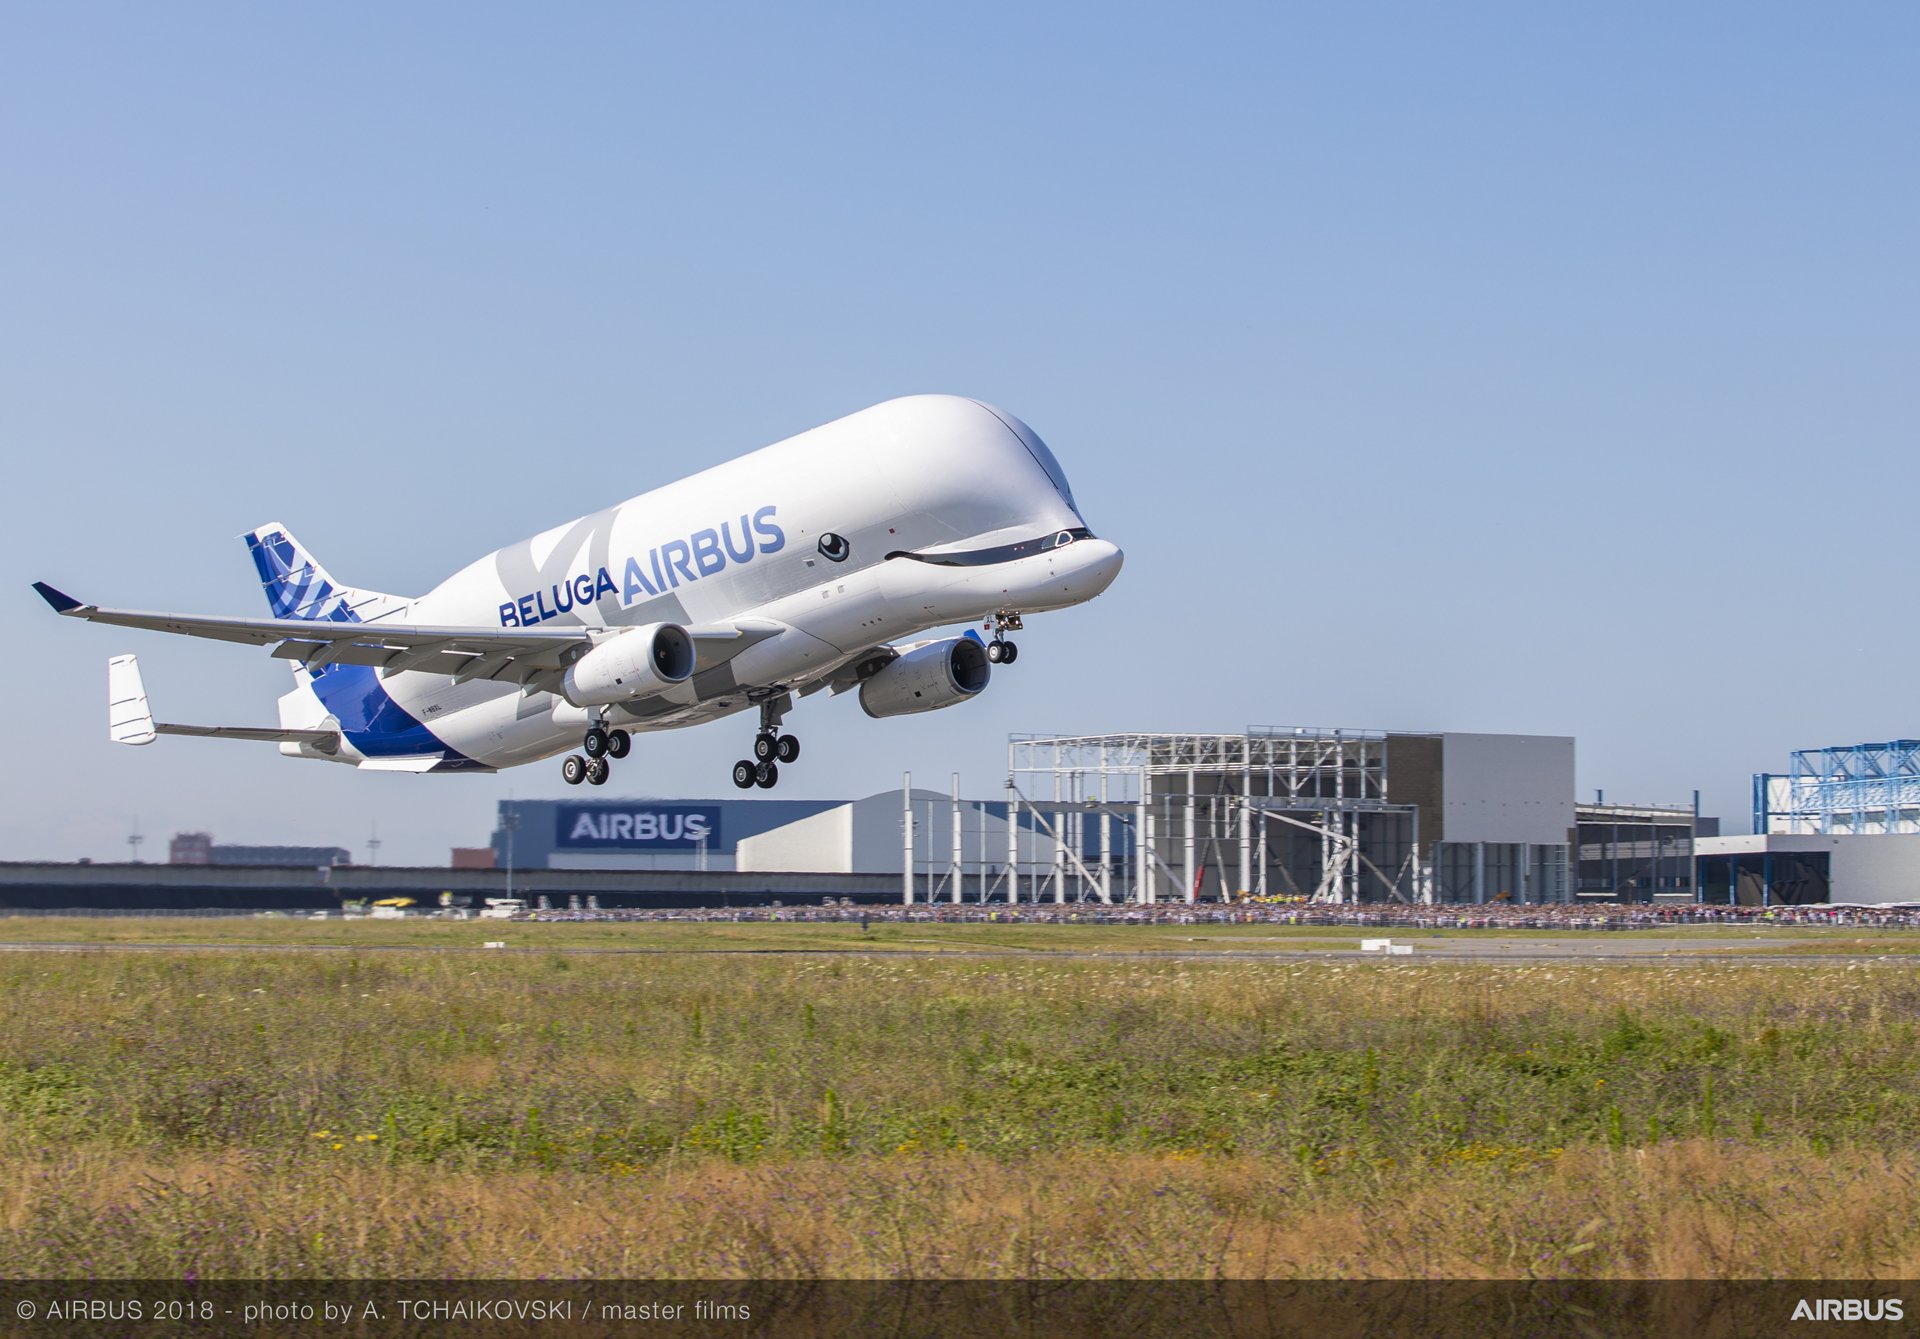 In the making: Airbus’ first BelugaXL